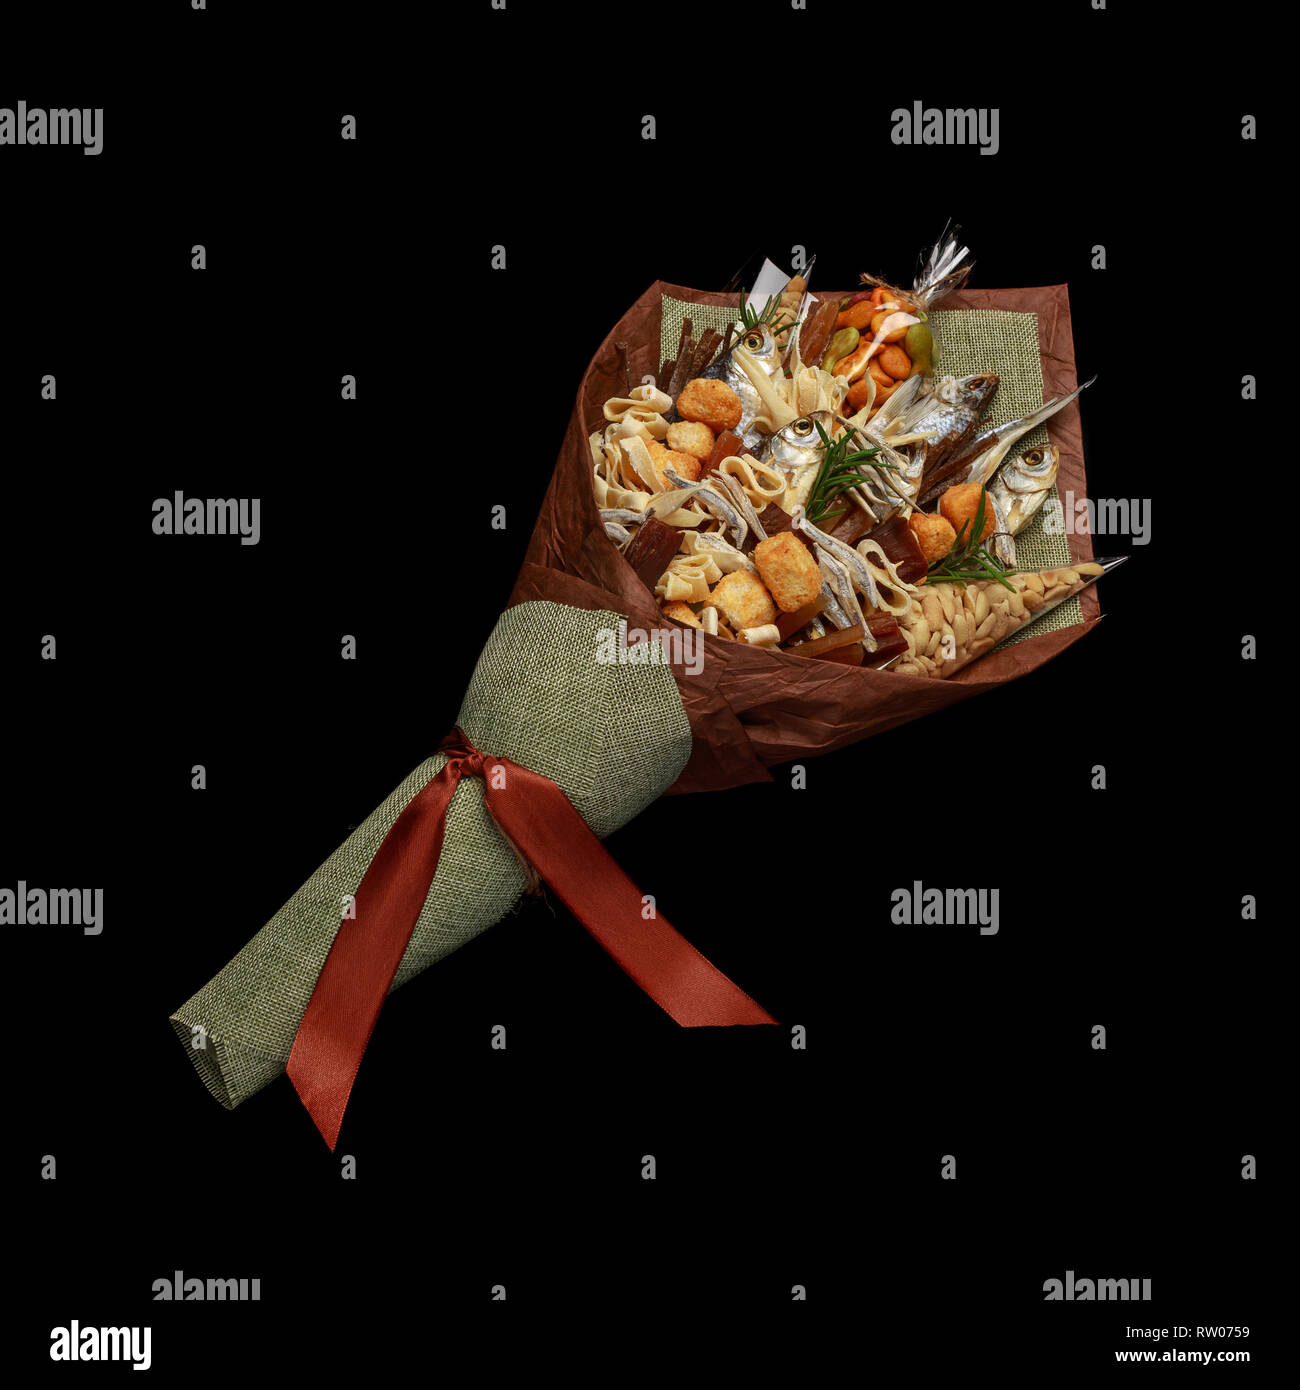 Unique bouquet consisting of dried salted fish, salted peanuts, crackers, dried bread and other beer snacks isolated on black background as male gift Stock Photo